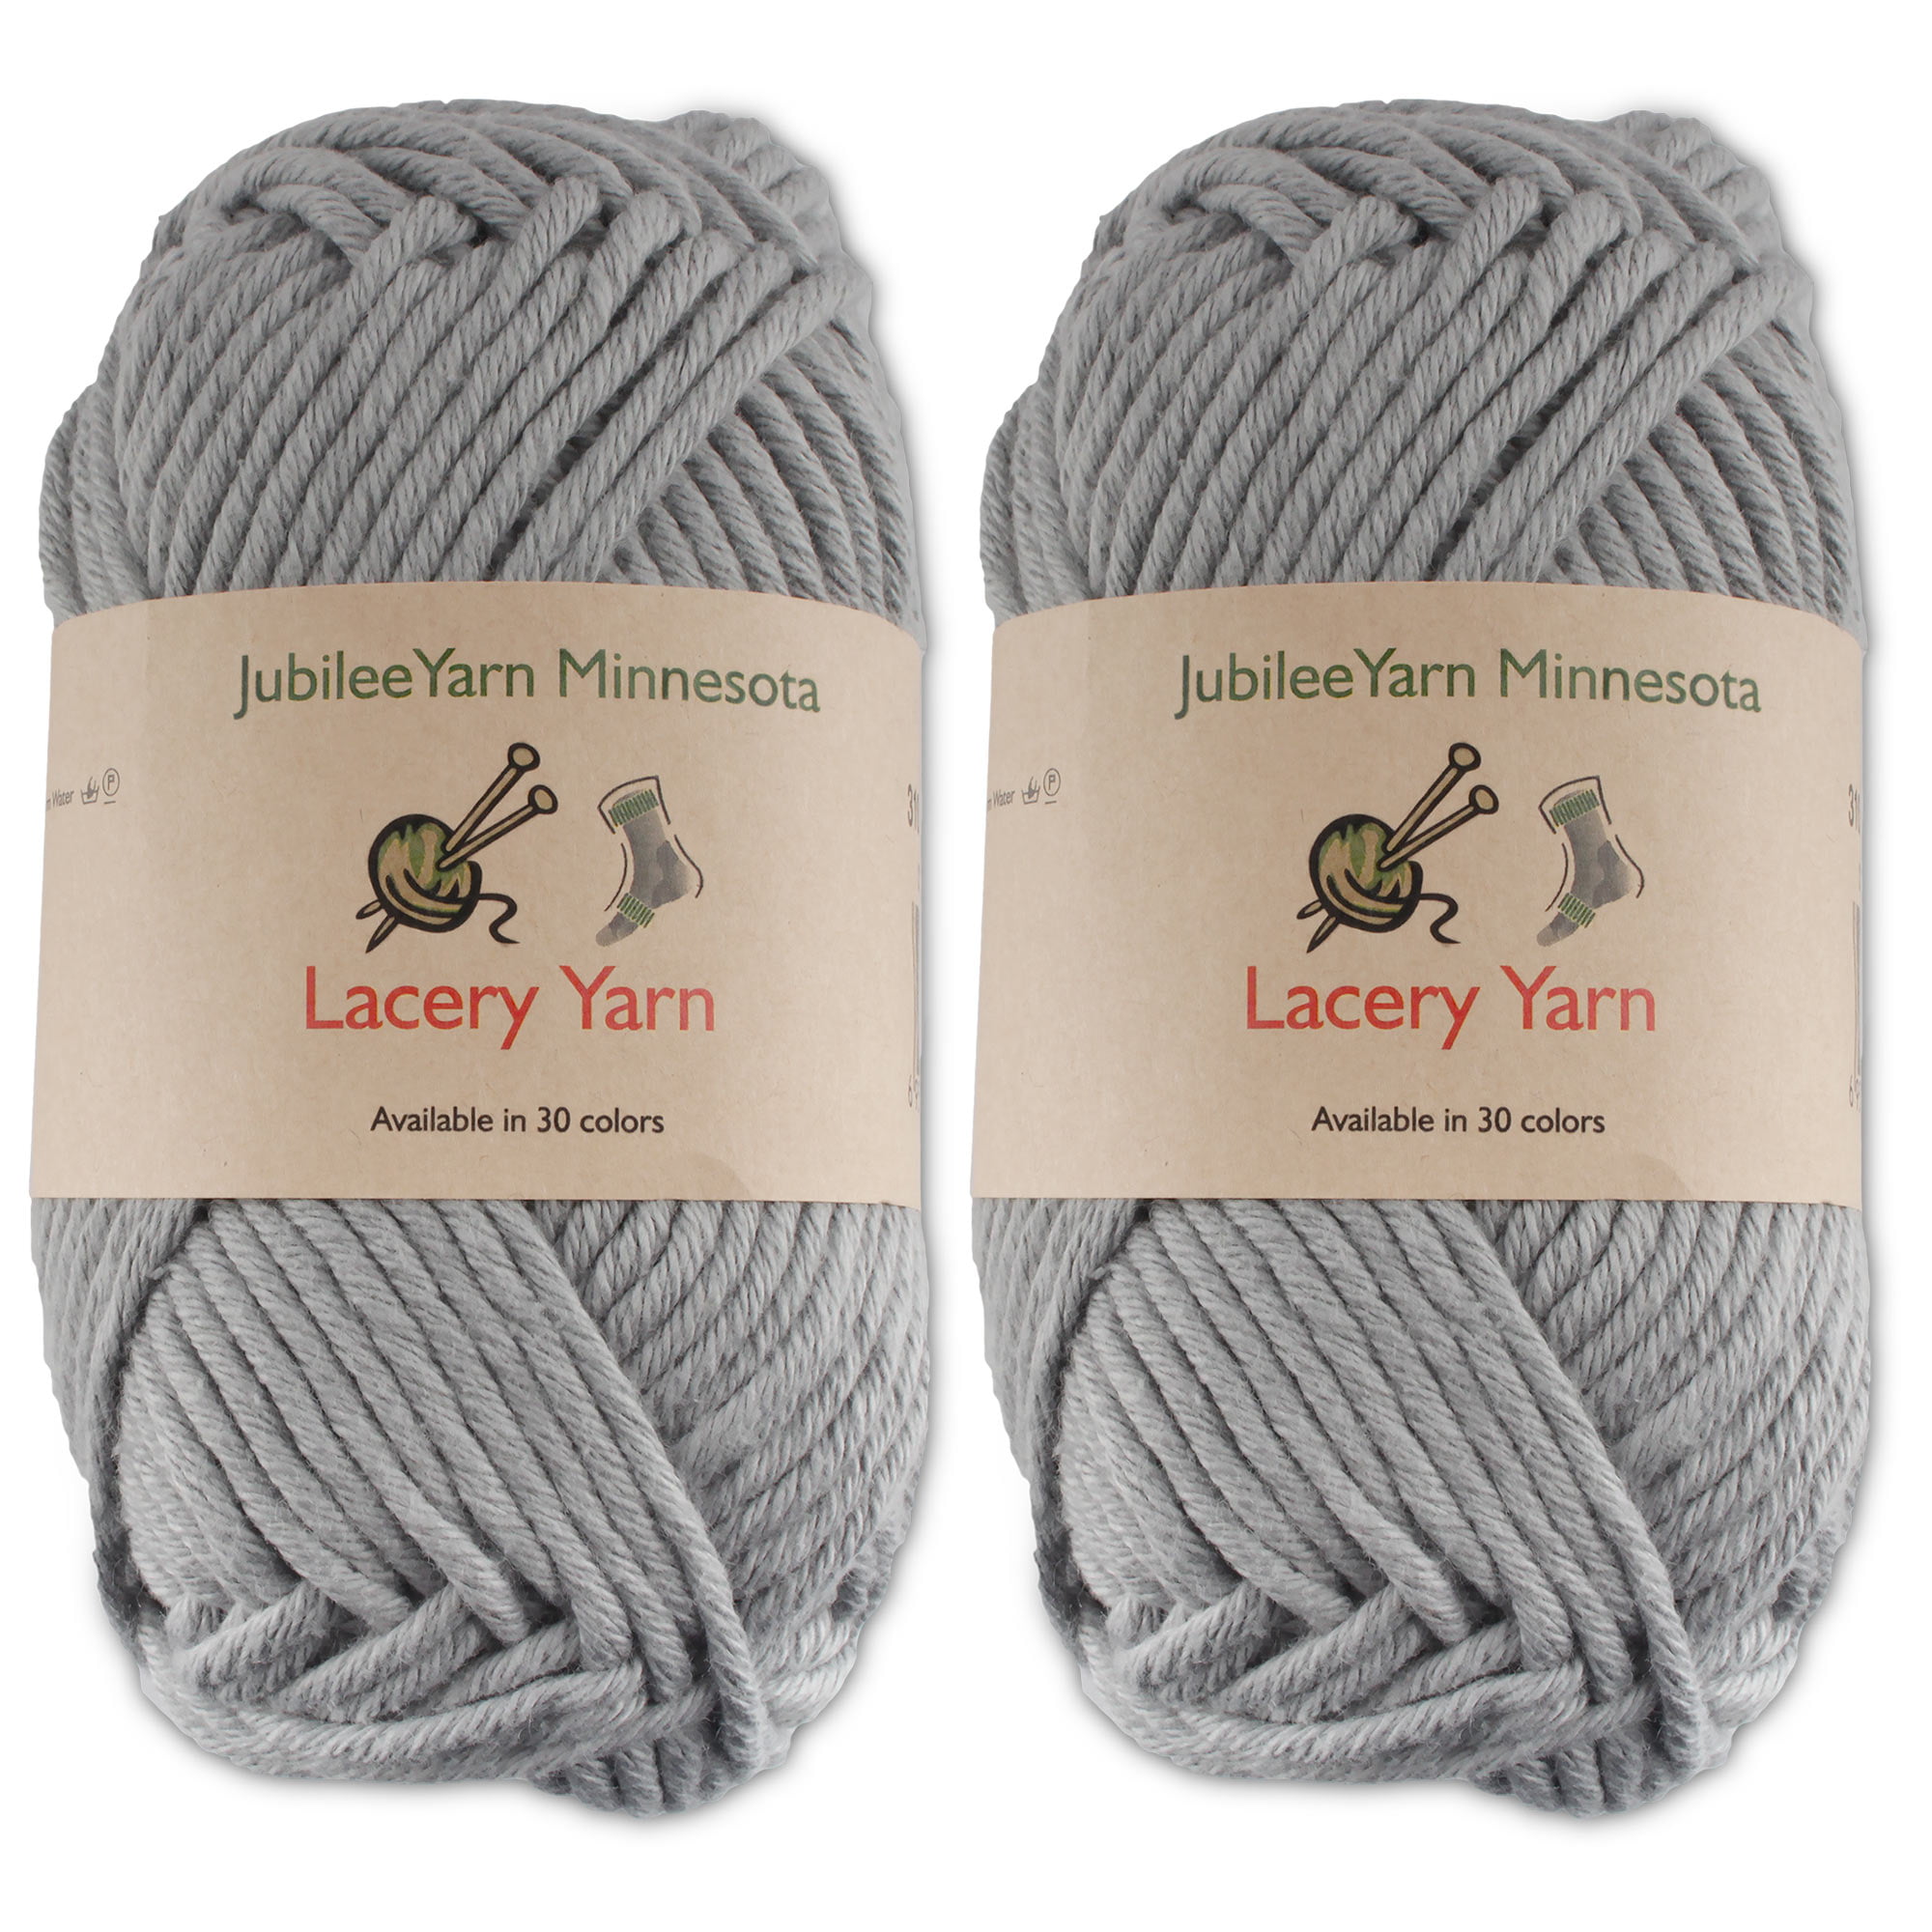 Bulky Weight Lacery Yarn 100g - 2 Skeins - 100% Cotton - Bright